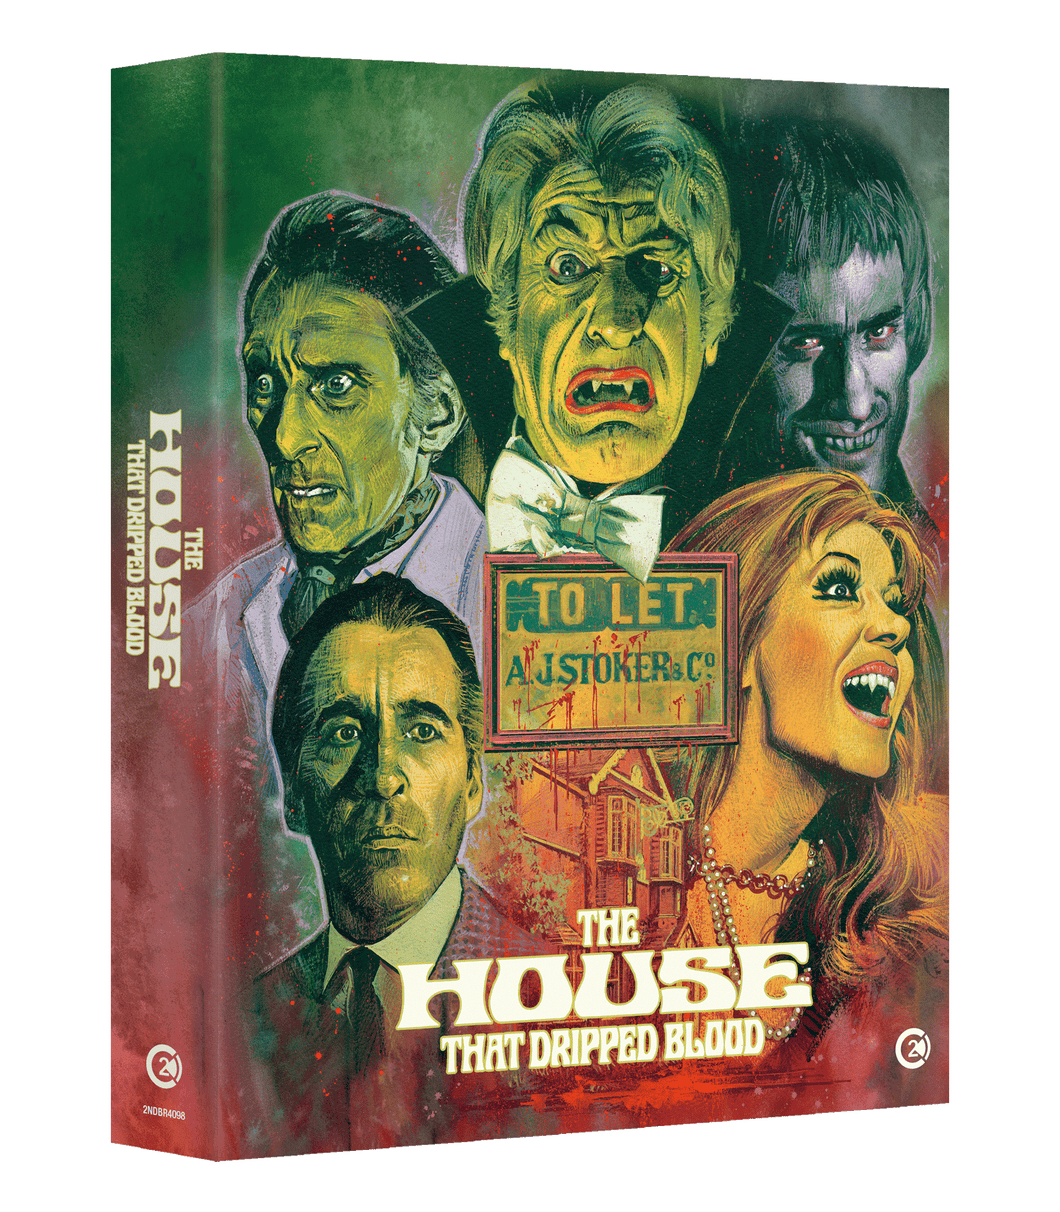 The House That Dripped Blood Limited Edition - OUT OF PRINT